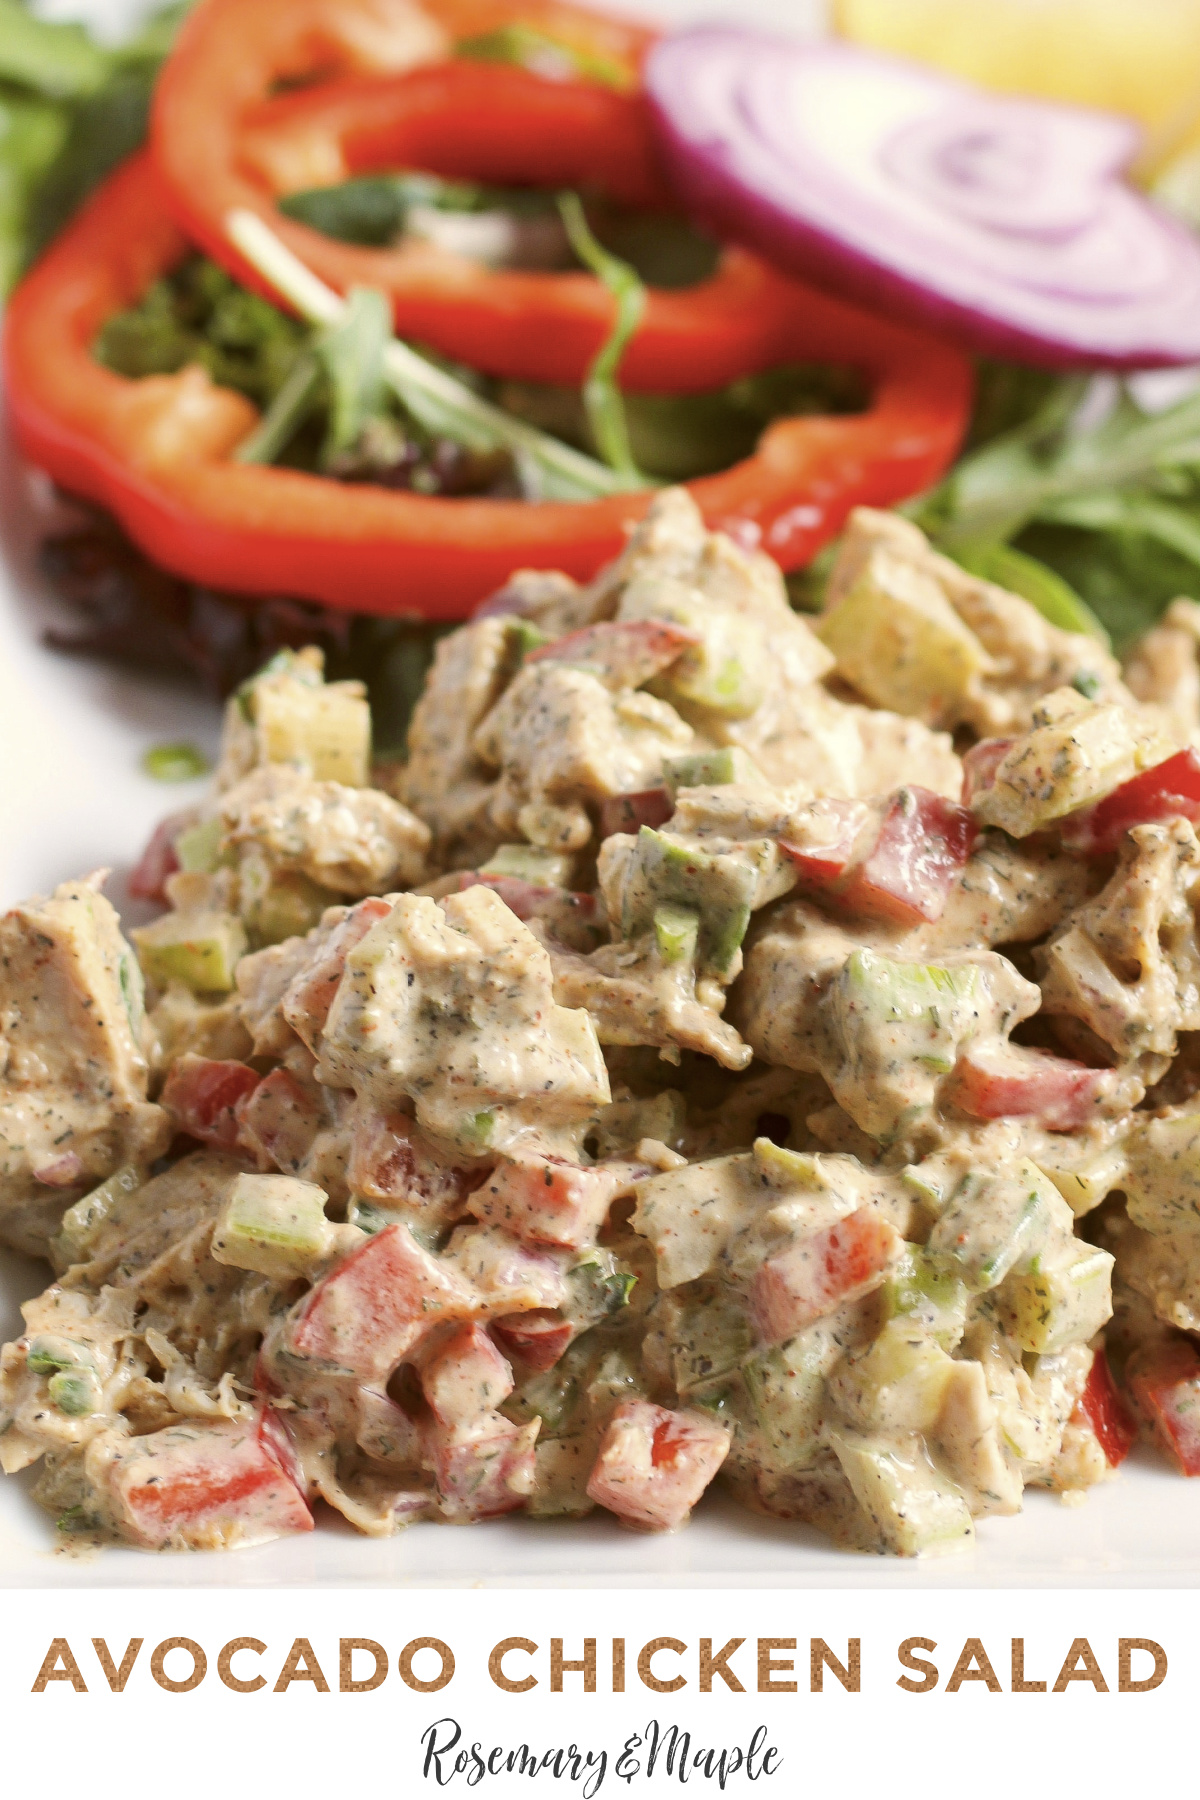 Make your next lunch an unforgettable one with this delicious and easy avocado chicken salad recipe - it's a healthy twist on a classic!